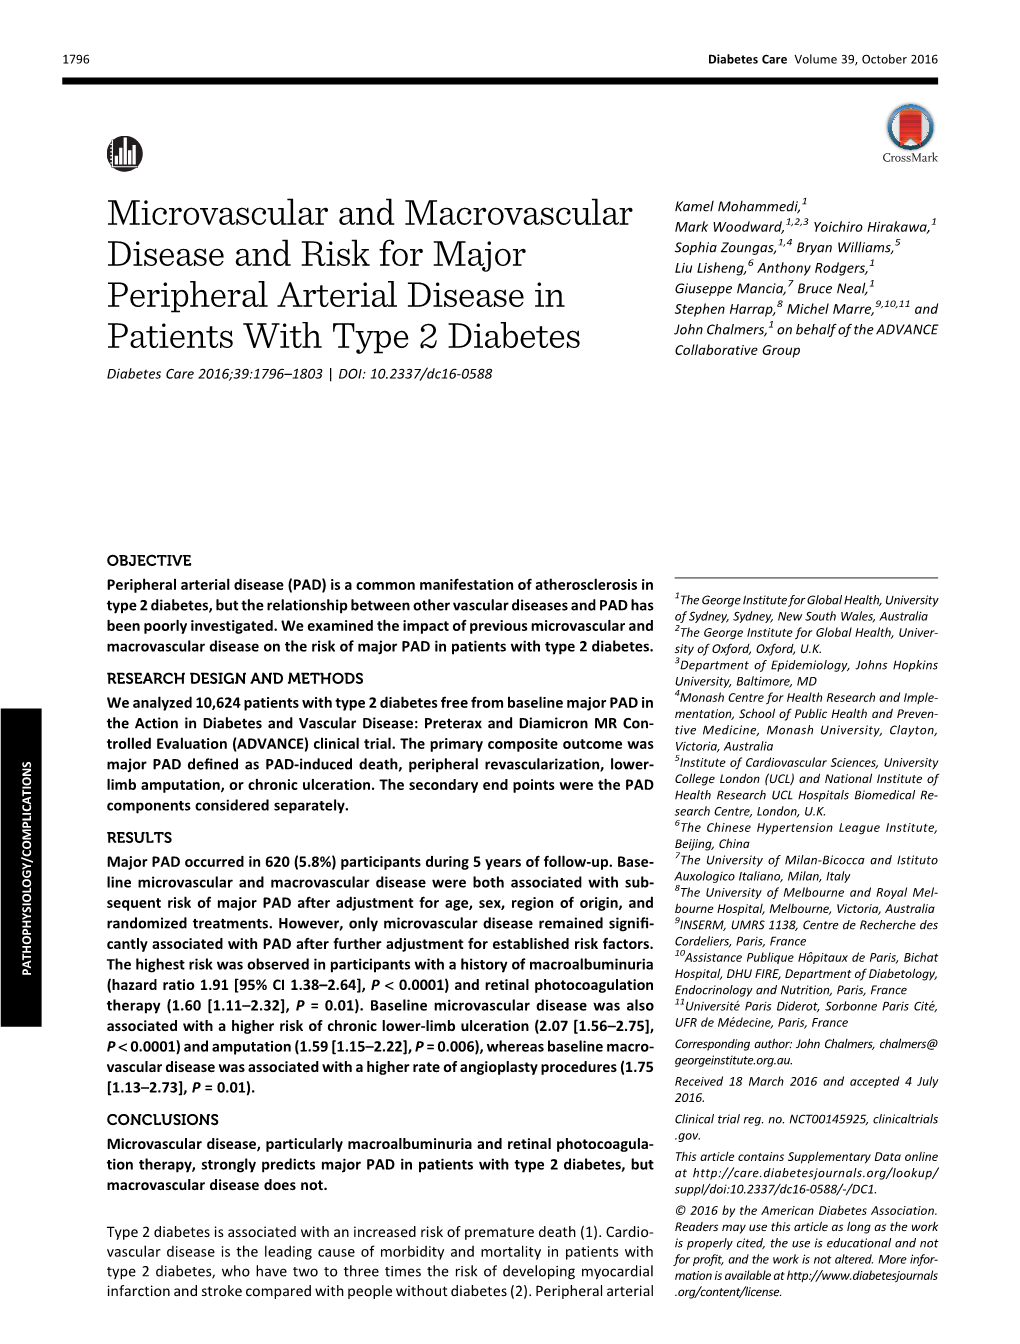 Microvascular and Macrovascular Disease and Risk for Major